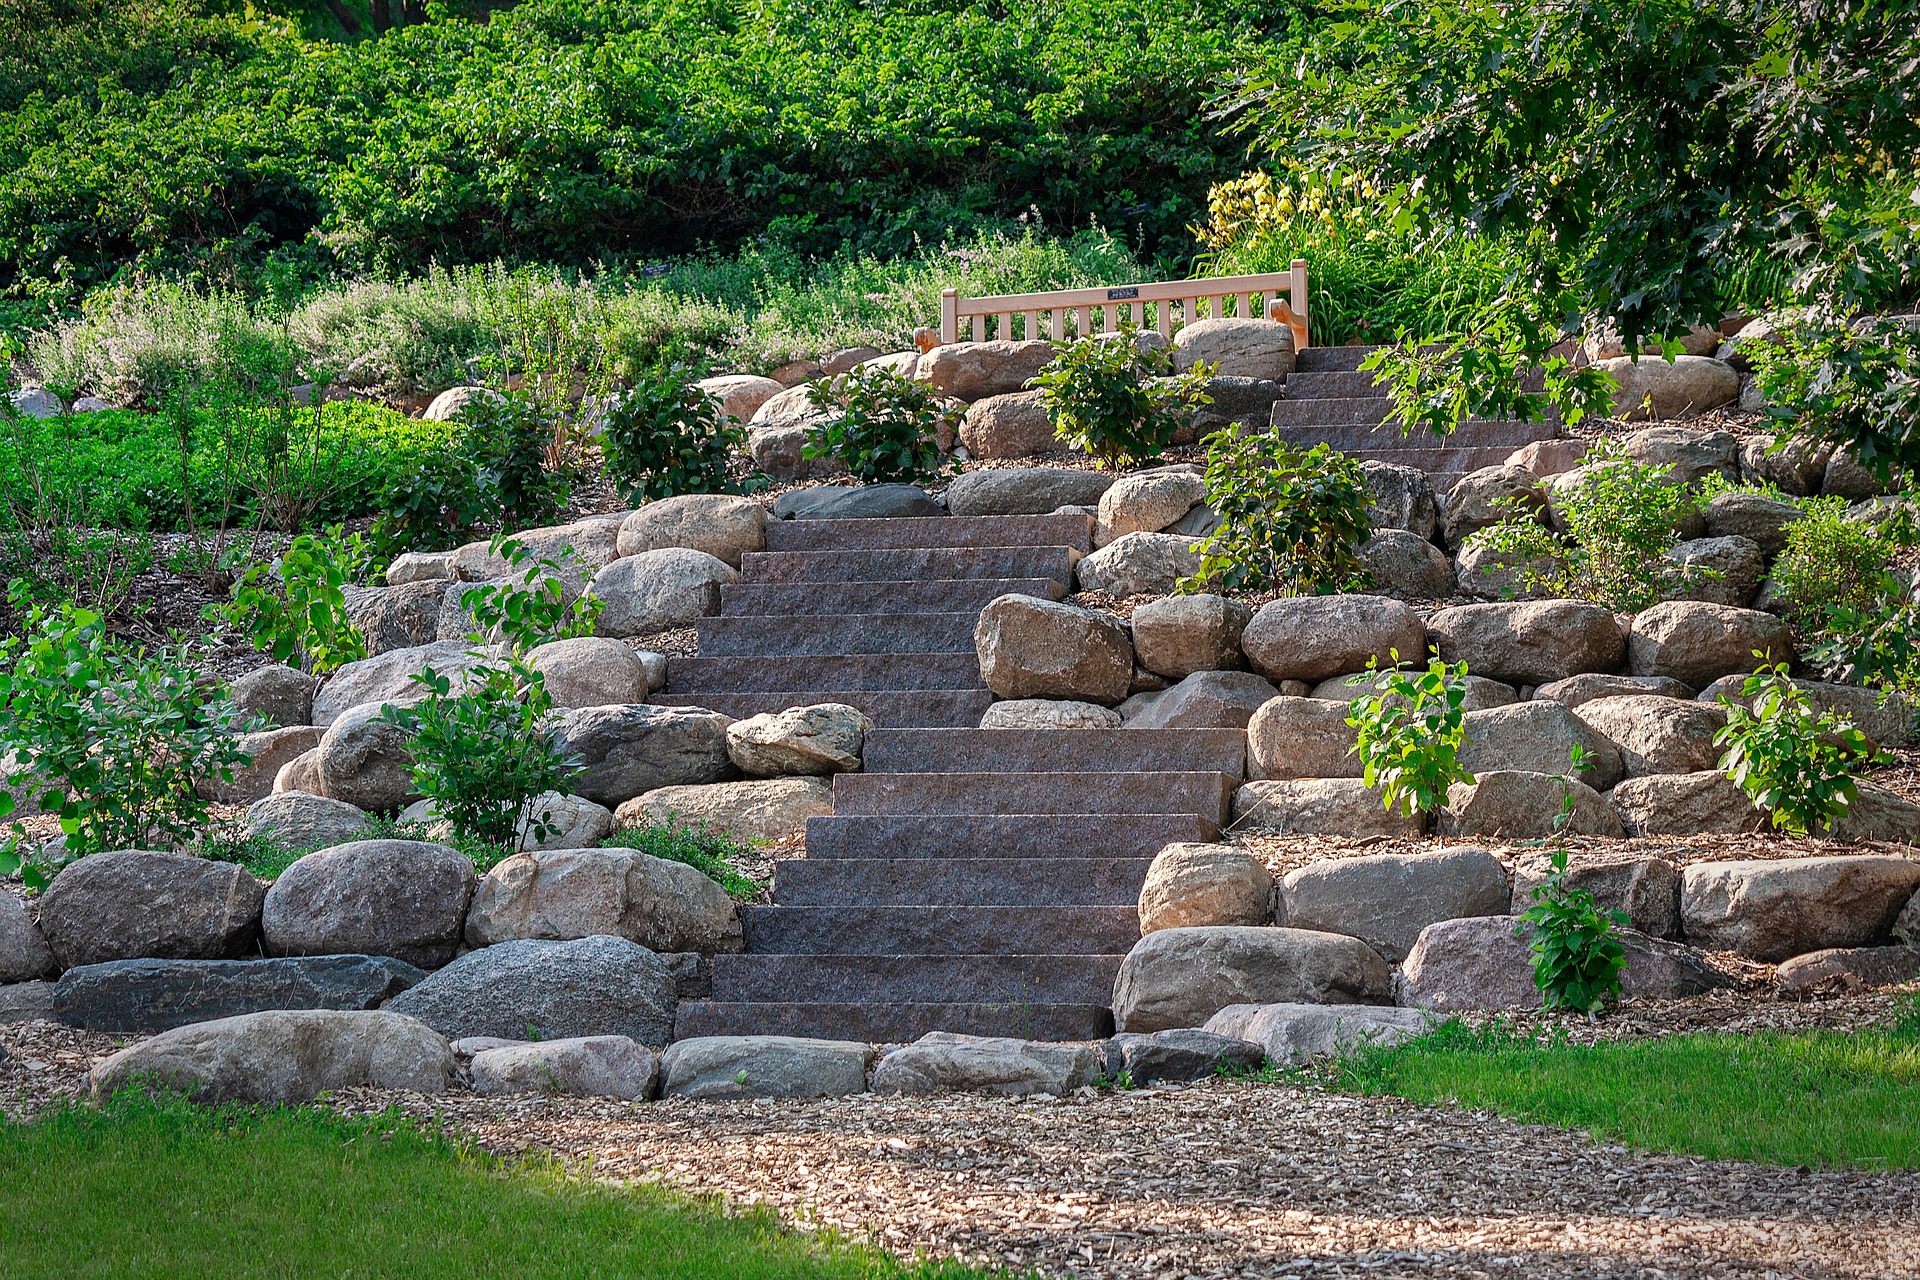 Knowing the basics of how to landscape a slope yields creative results like this mix-and-match boulder and slab terrace.